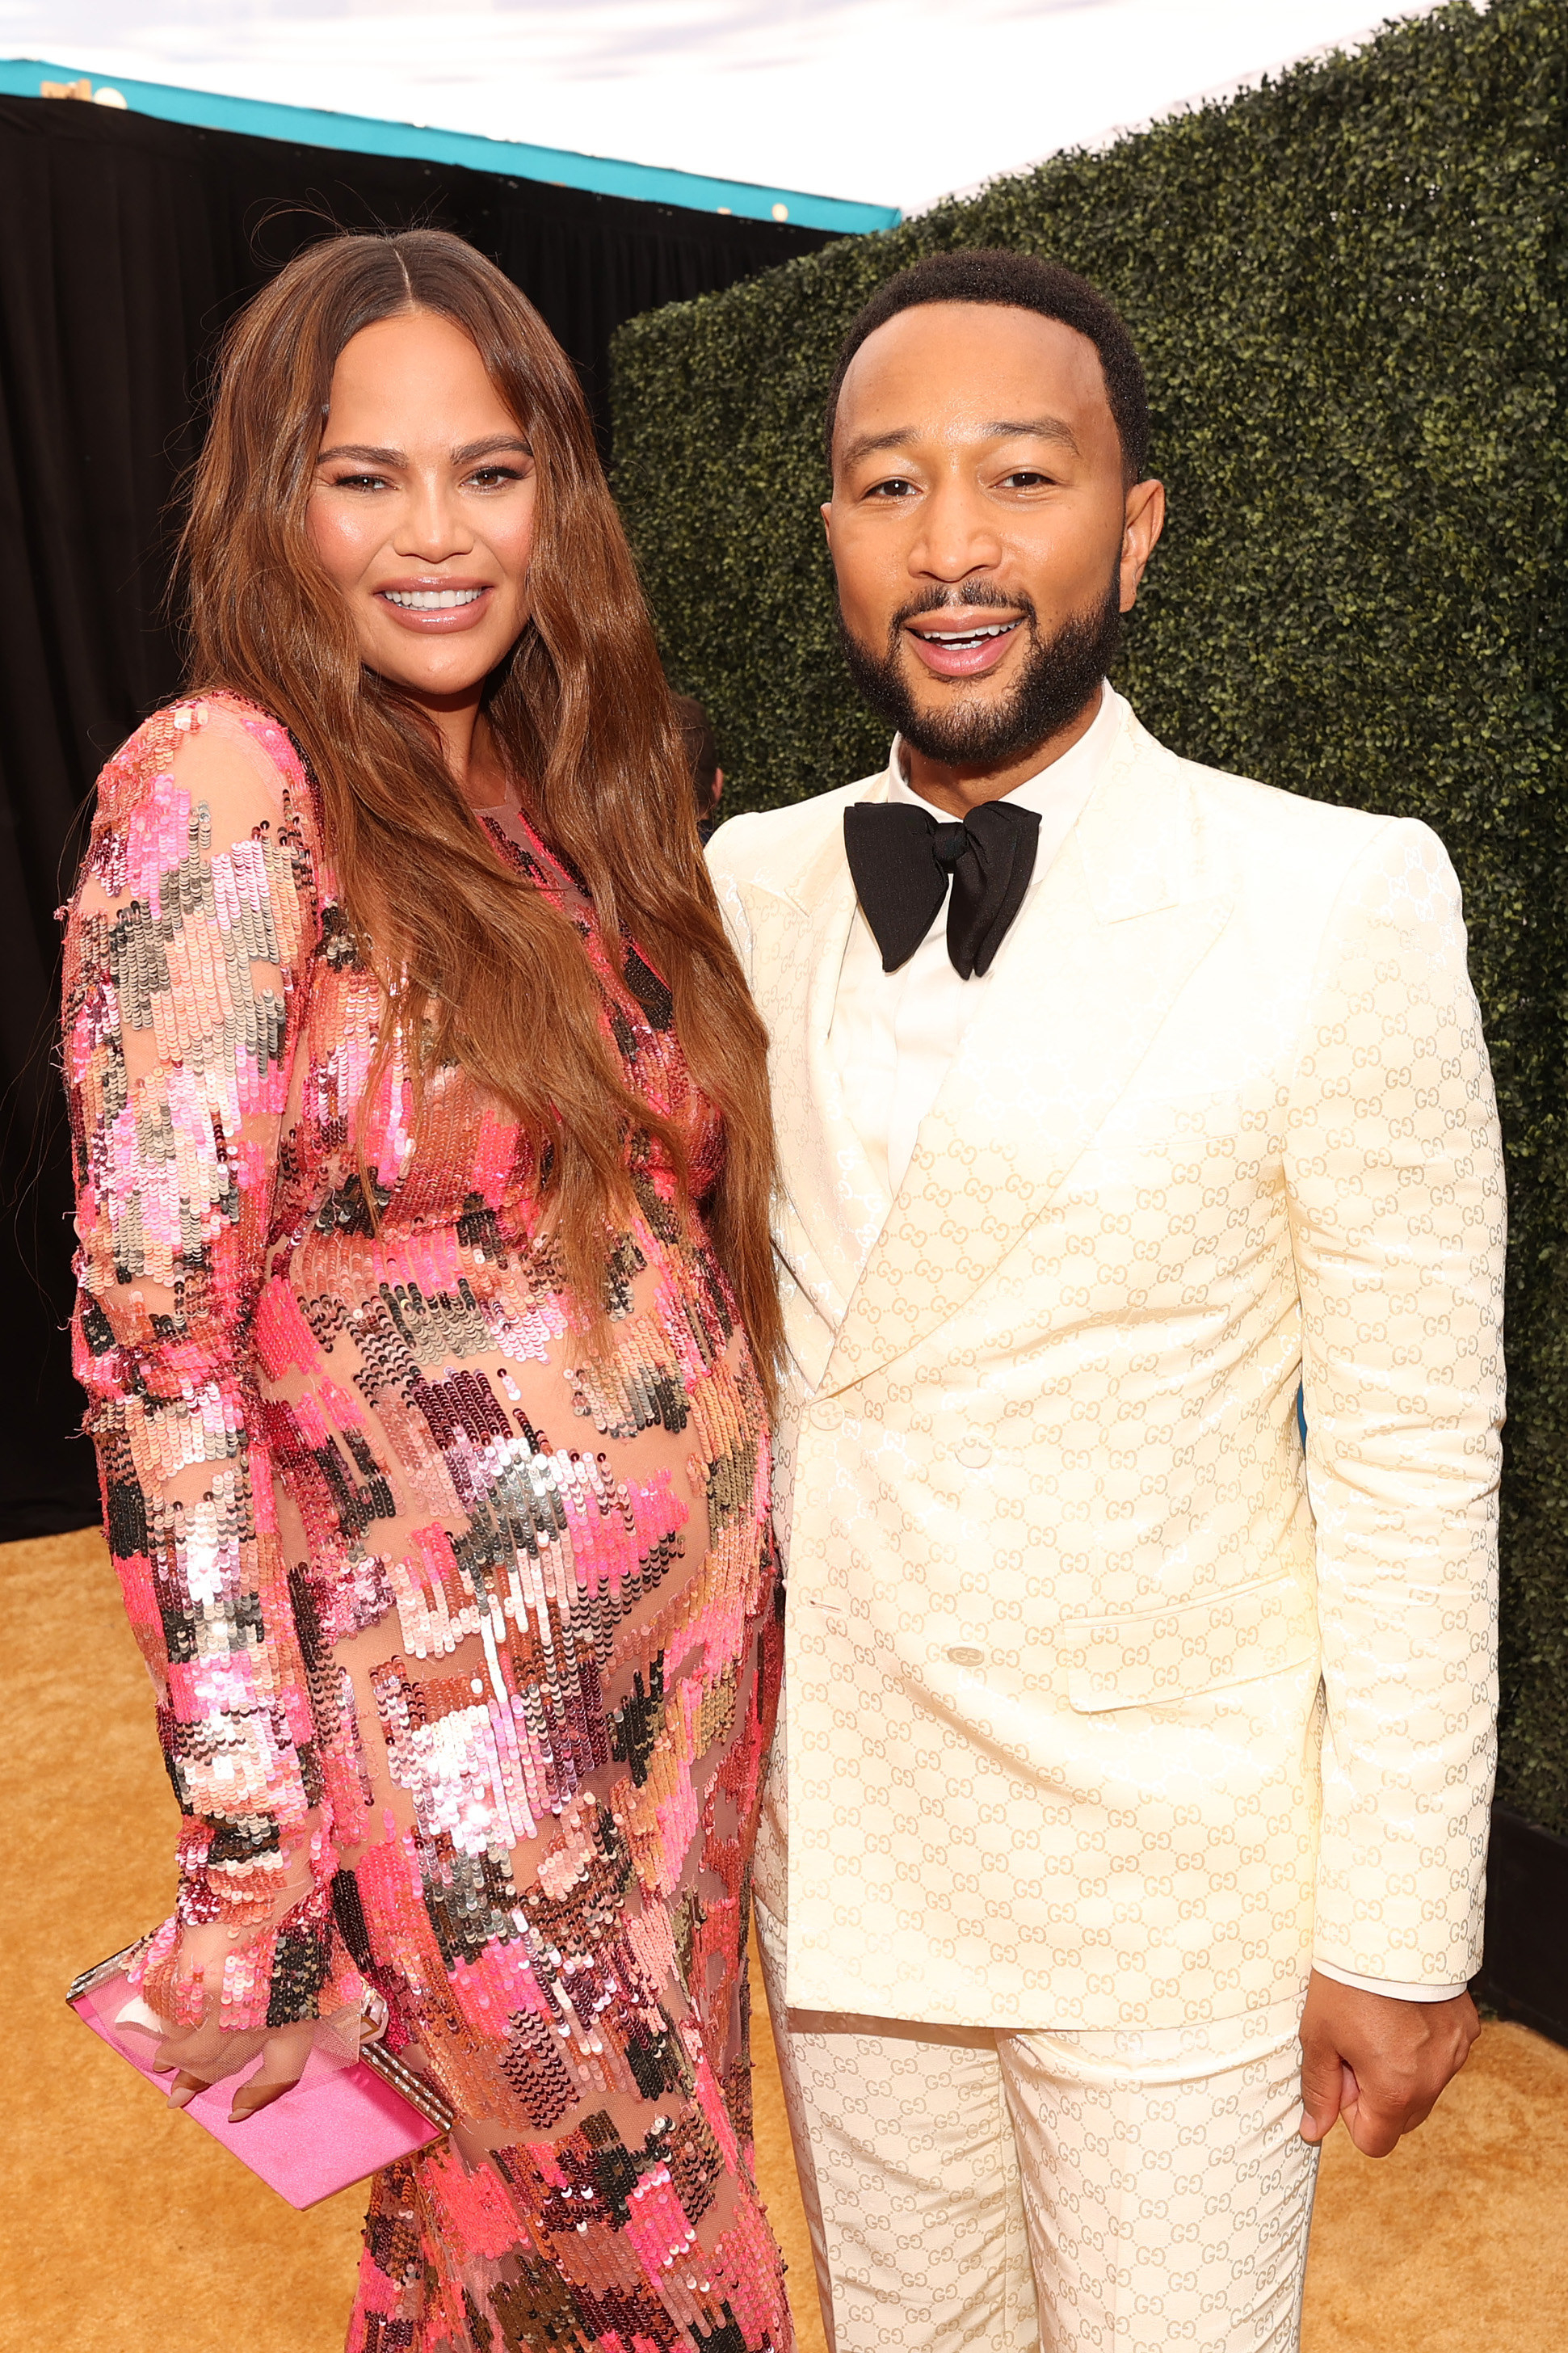 A pregnant Chrissy wears a sequined long-sleeved dress as she poses for a photo with John who&#x27;s wearing suit and bowtie